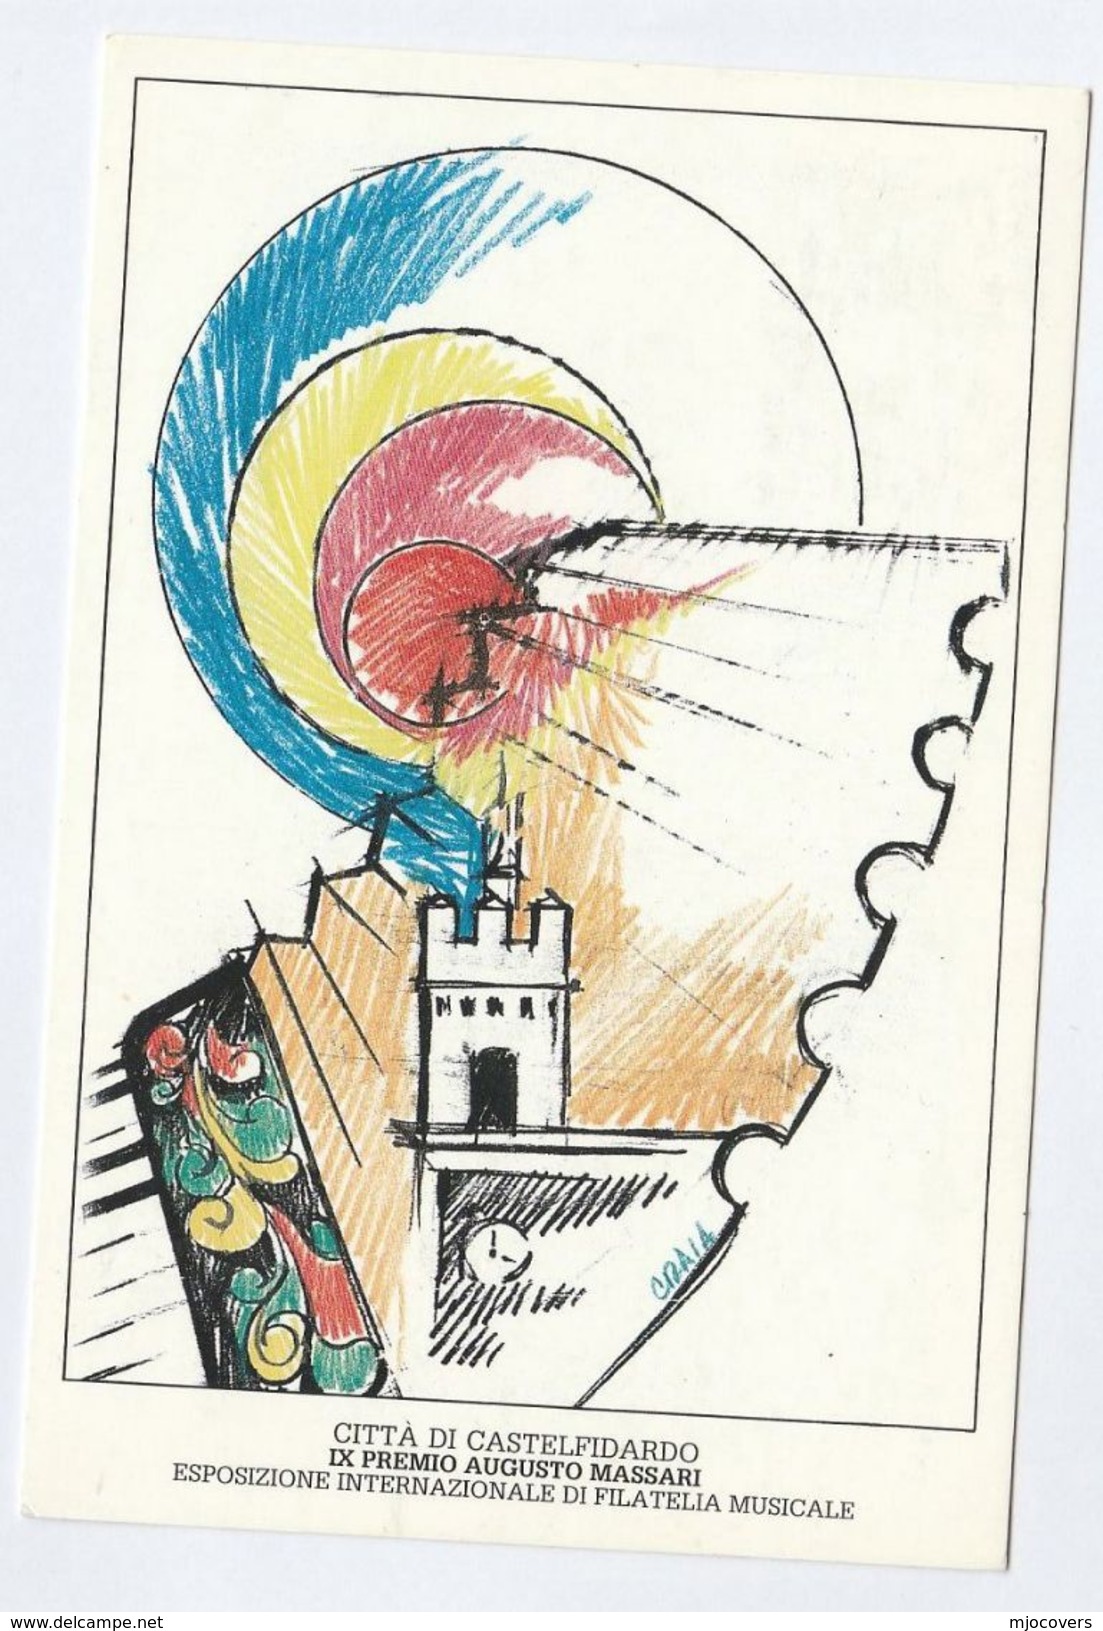 1986 Castelfidardo MUSIC PHILATELY EXHIBITION EVENT COVER Card ITALY Stamps Postcard - Music